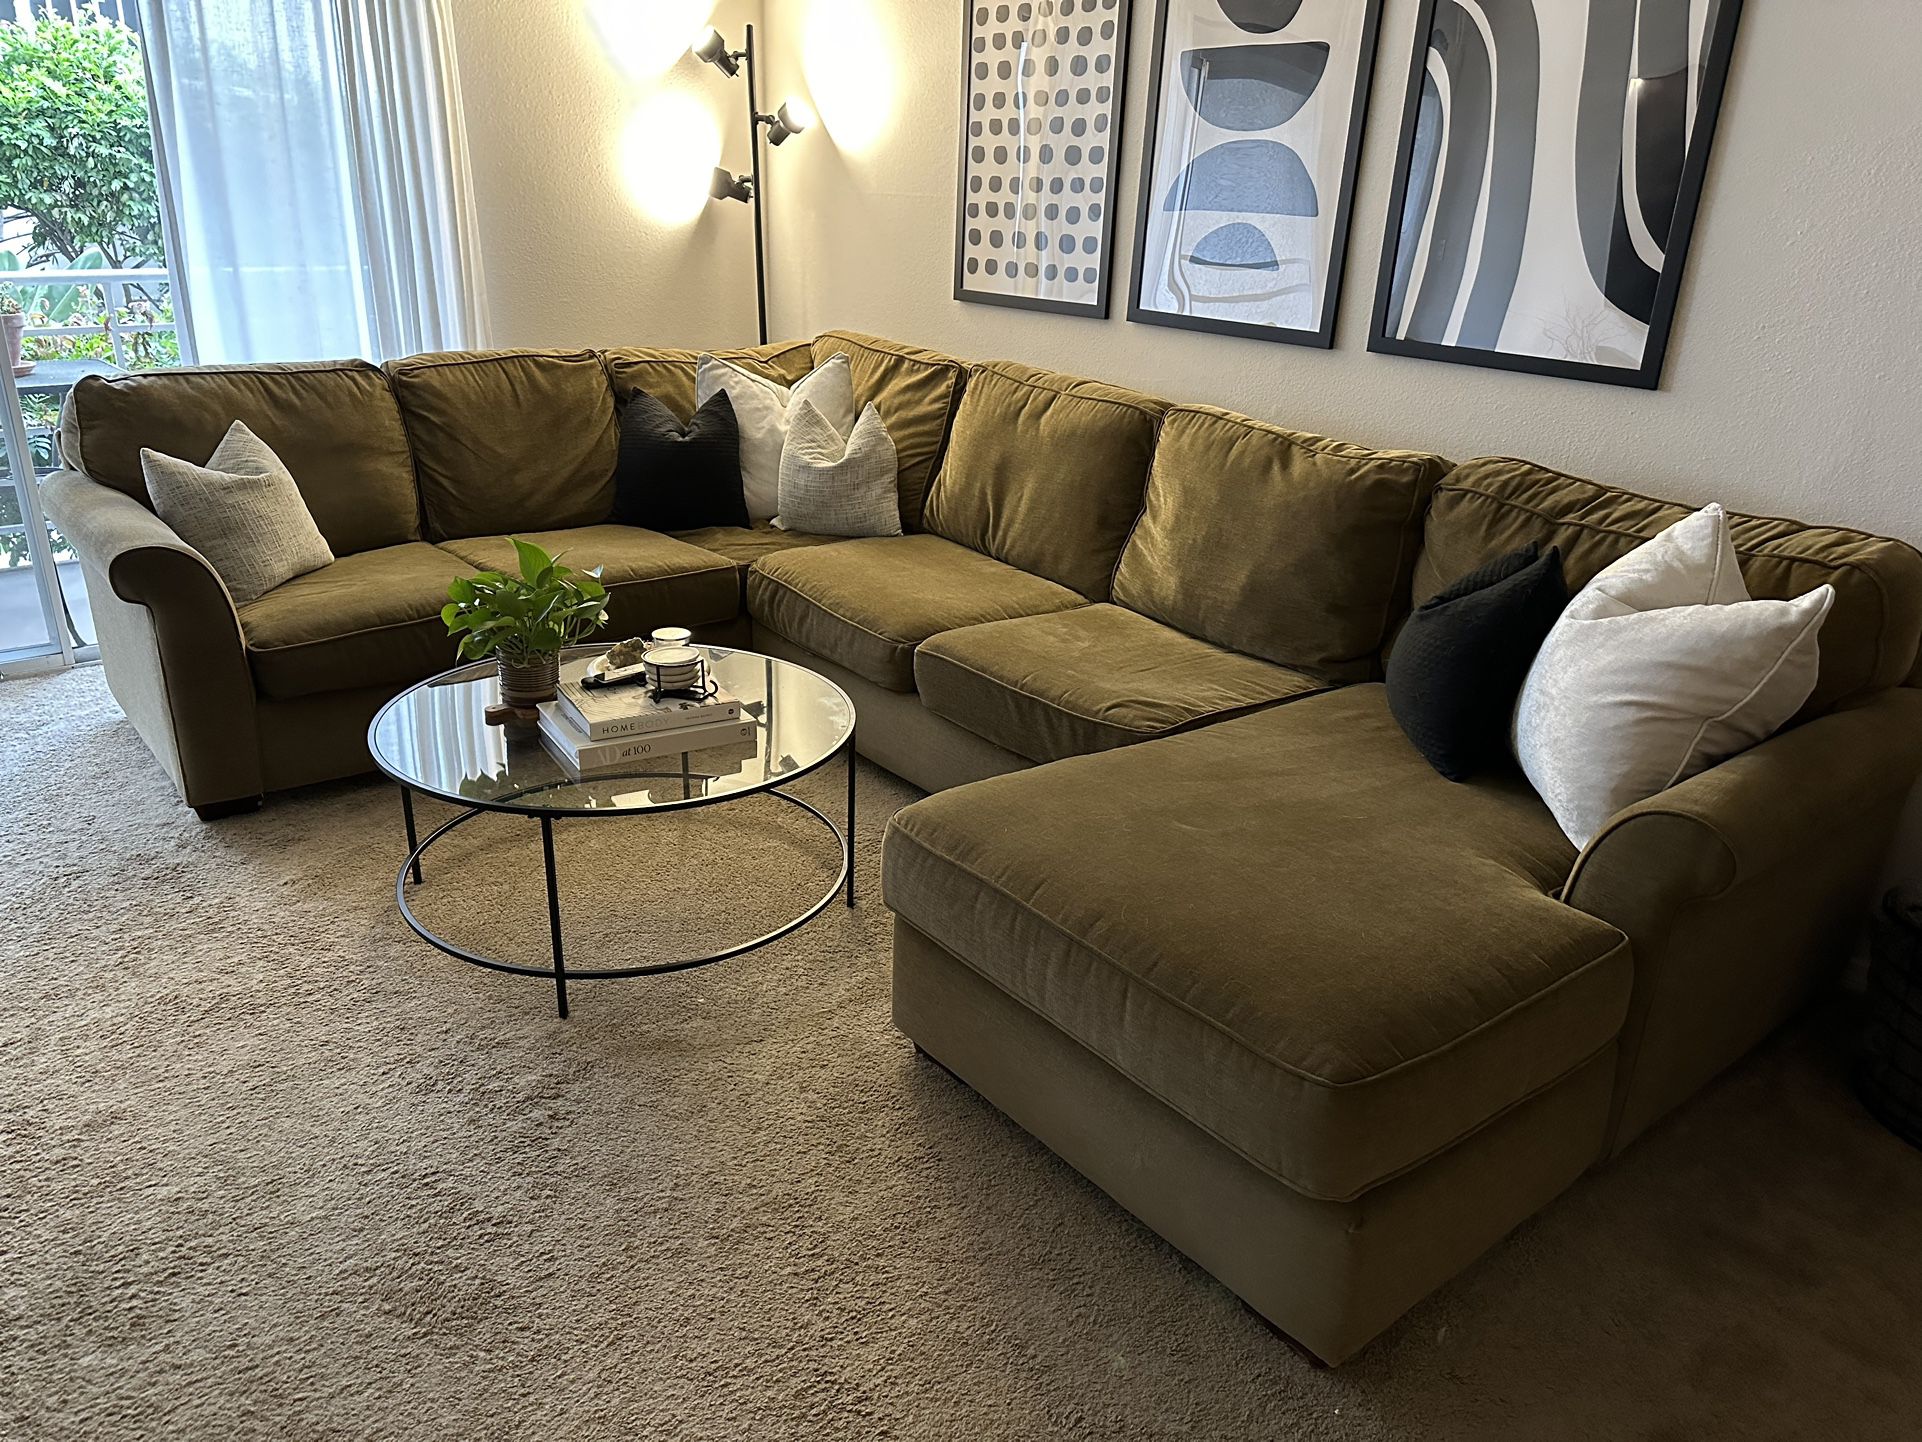 Large Brown/tan Sectional Couch